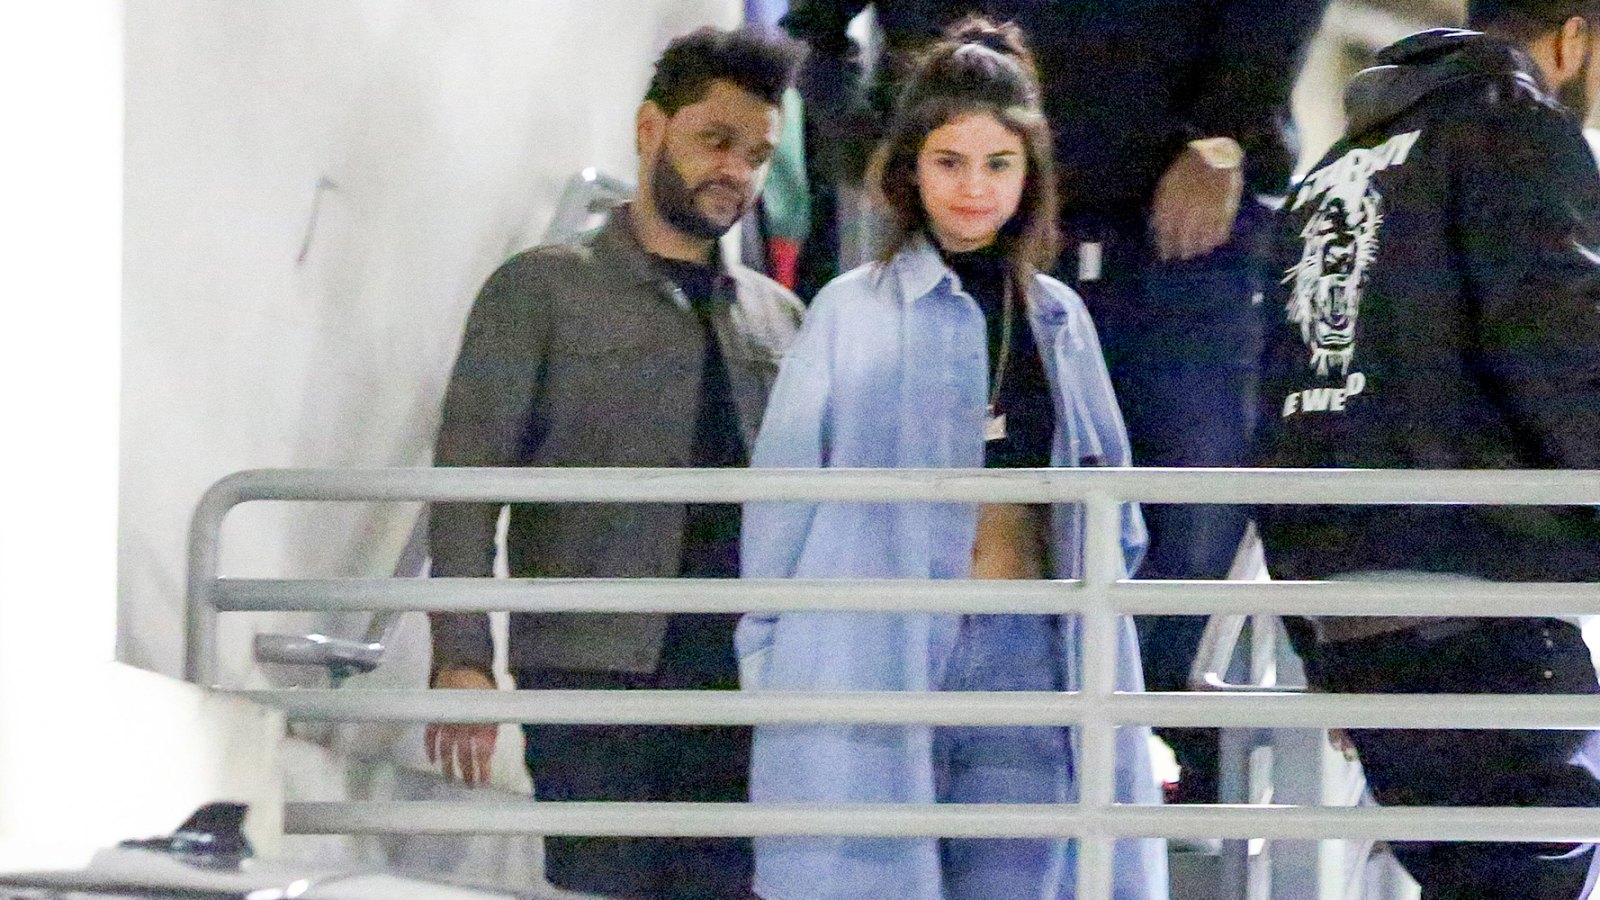 Selena Gomez and The Weeknd Have a Date Night in Hollywood -- See